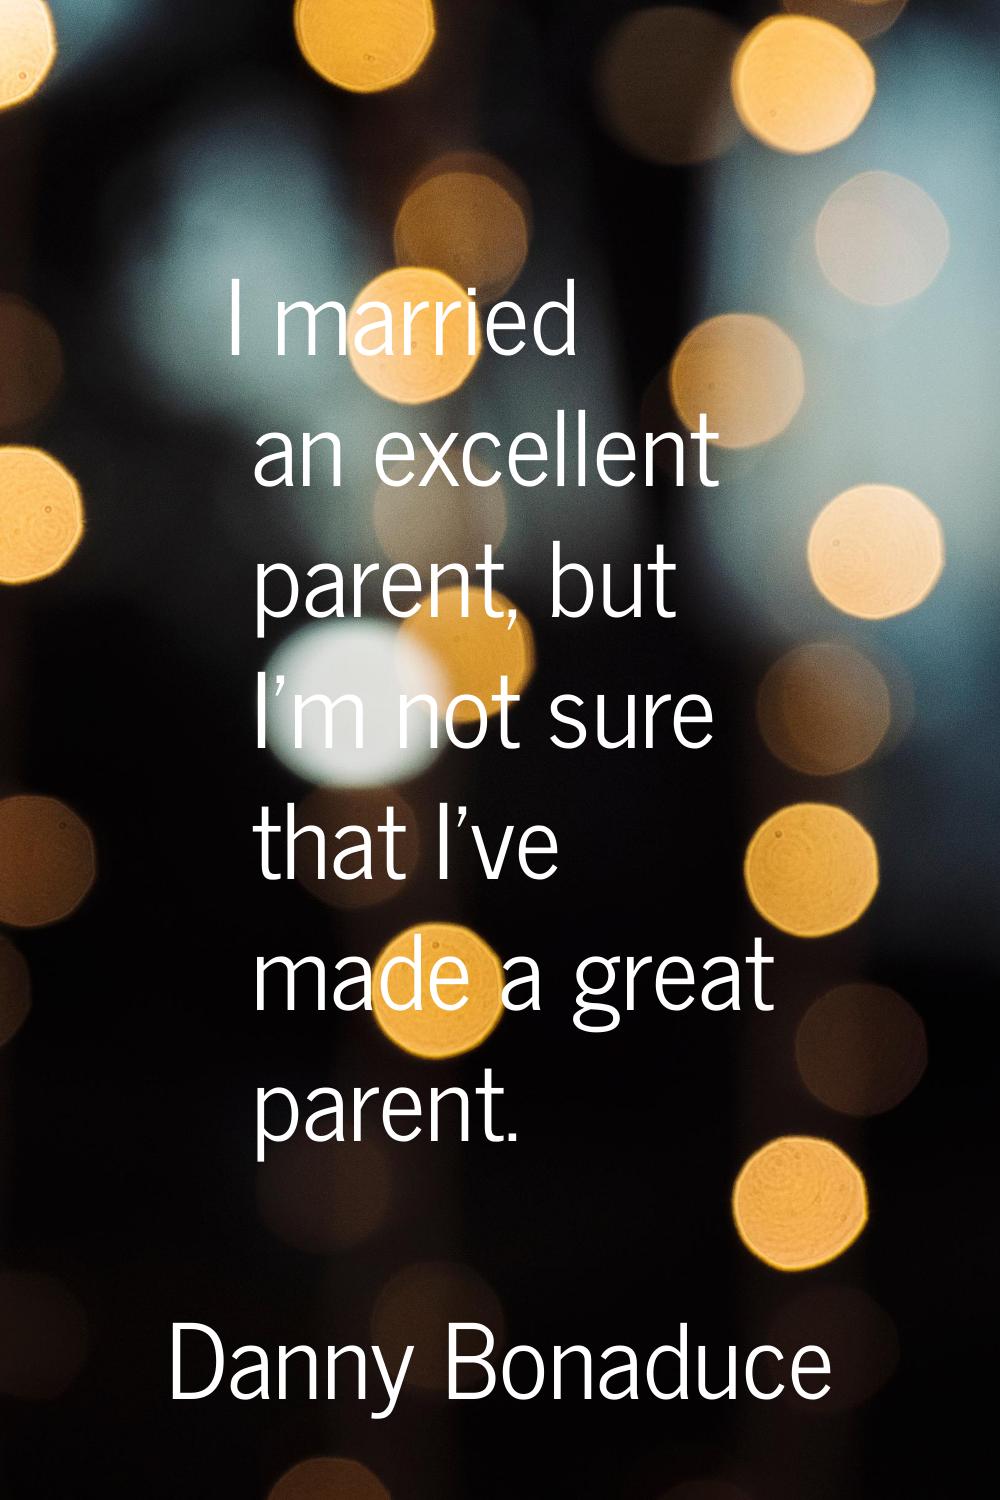 I married an excellent parent, but I'm not sure that I've made a great parent.